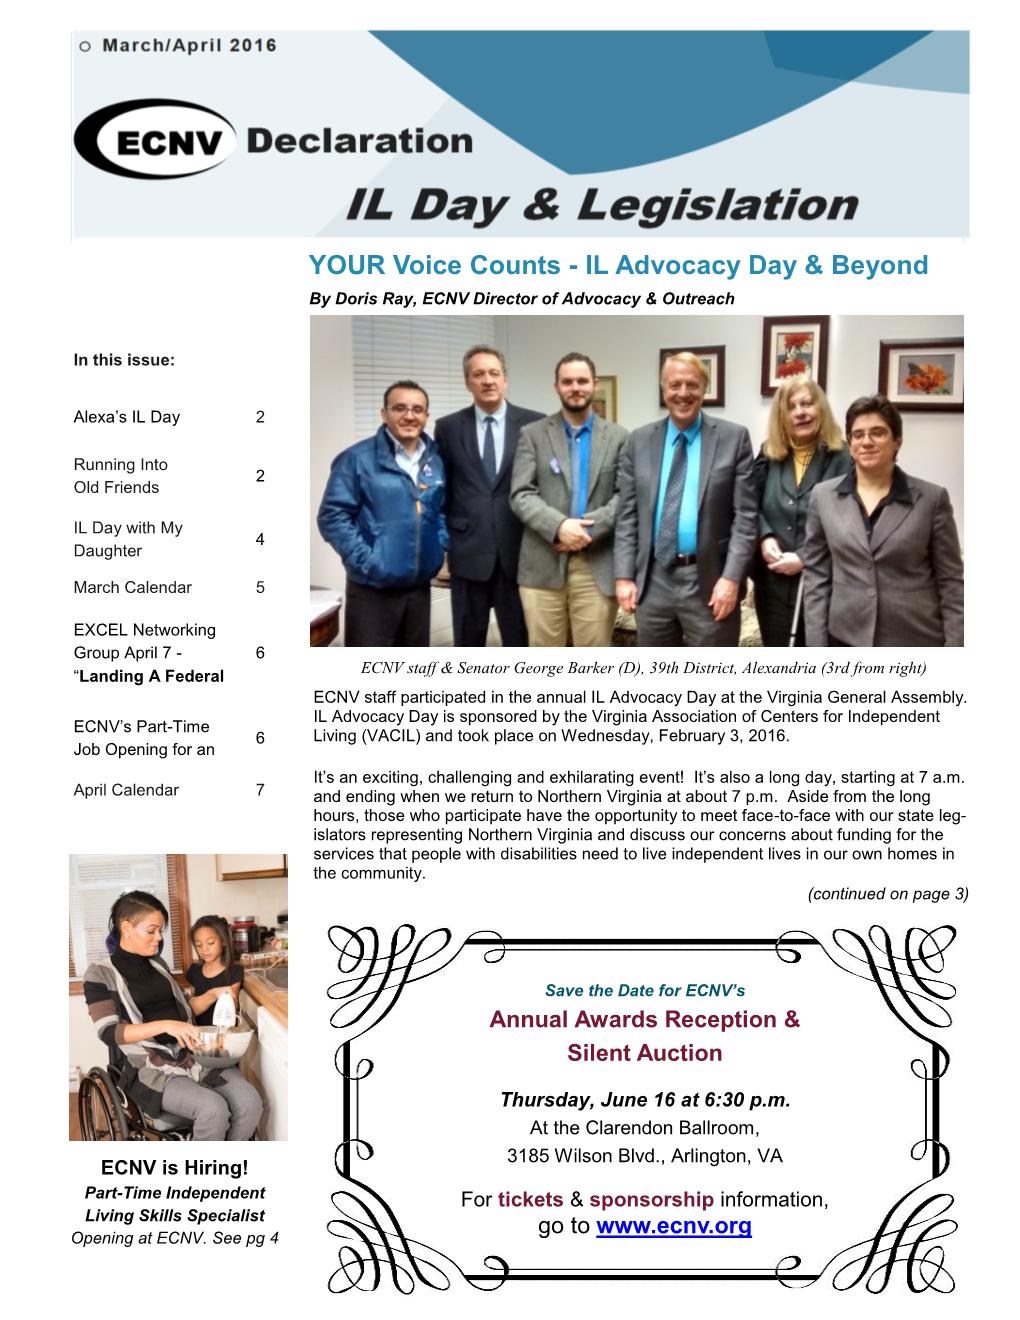 YOUR Voice Counts - IL Advocacy Day & Beyond by Doris Ray, ECNV Director of Advocacy & Outreach